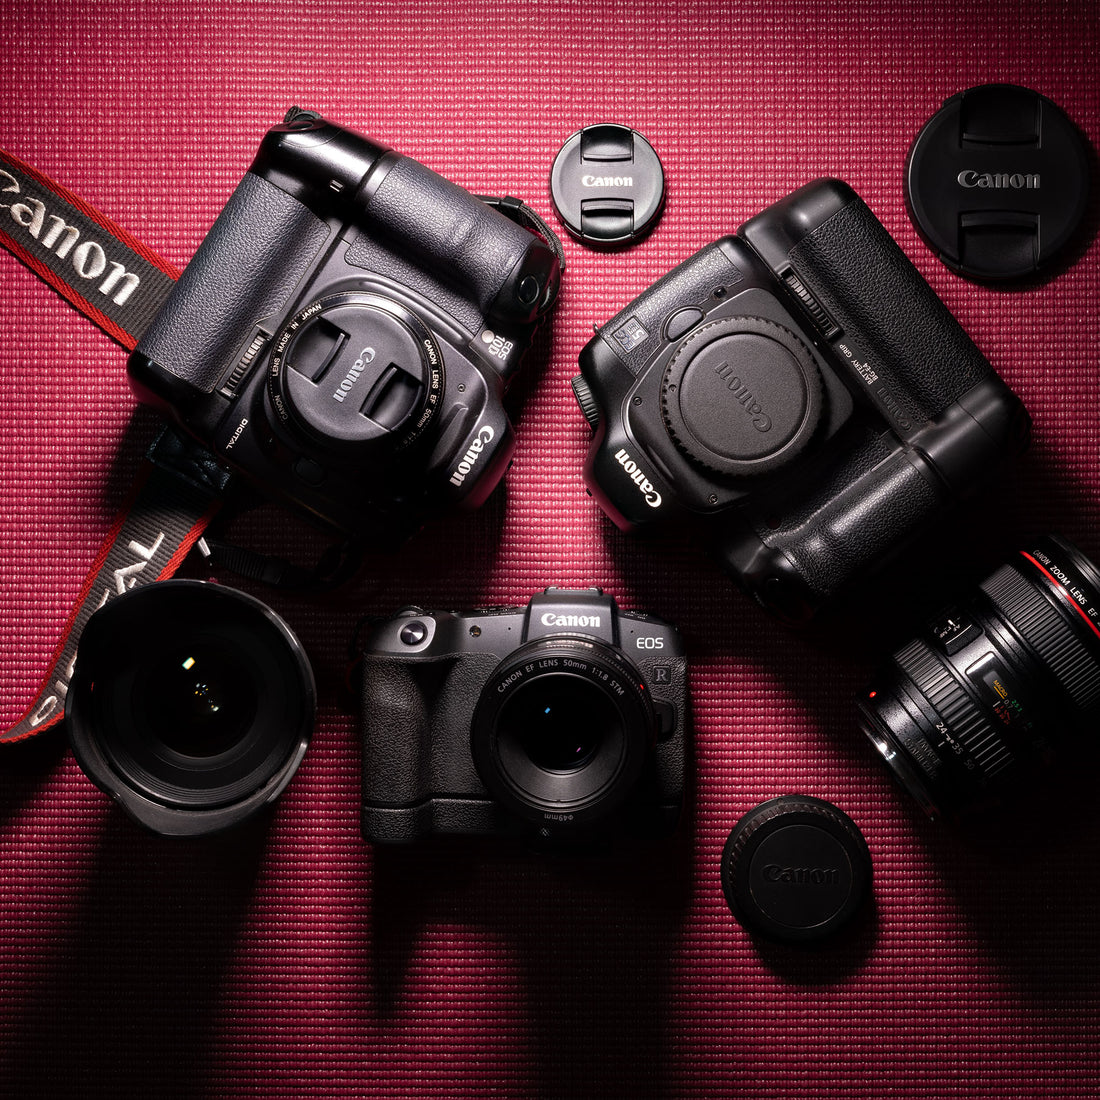 TOP 5 Entry-Level Canon Cameras for New photographers